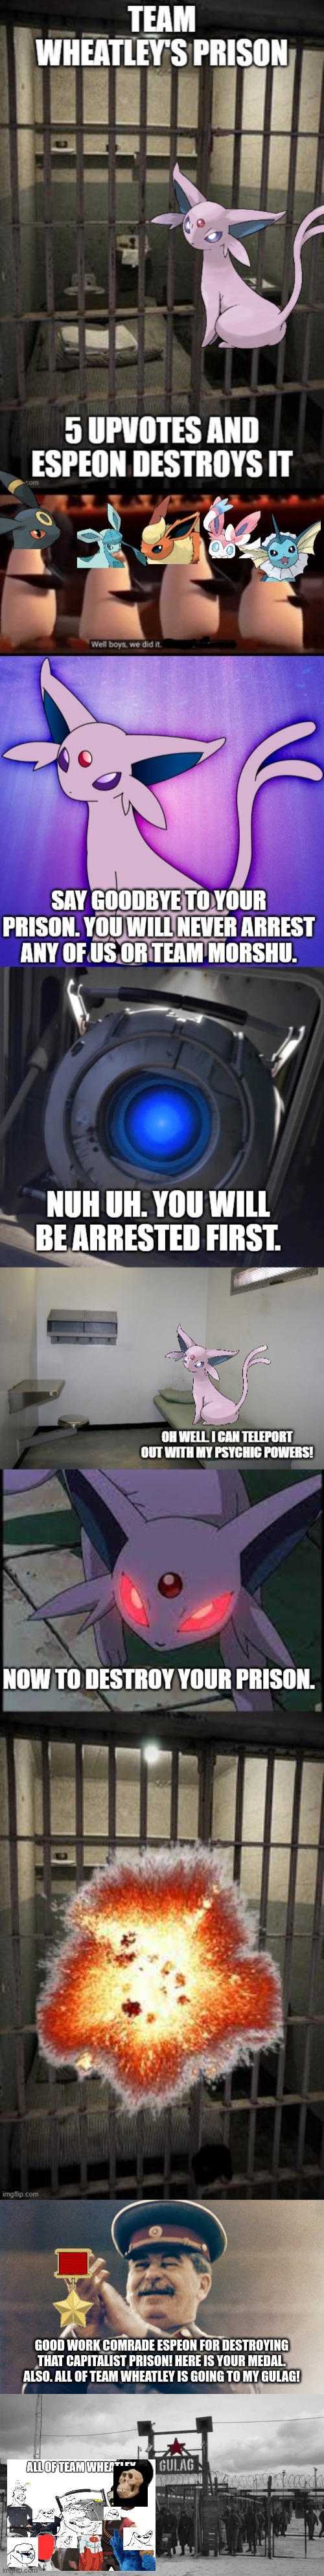 GOOD WORK COMRADE ESPEON FOR DESTROYING THAT CAPITALIST PRISON! HERE IS YOUR MEDAL. ALSO. ALL OF TEAM WHEATLEY IS GOING TO MY GULAG! | image tagged in stalin approves,gulag | made w/ Imgflip meme maker